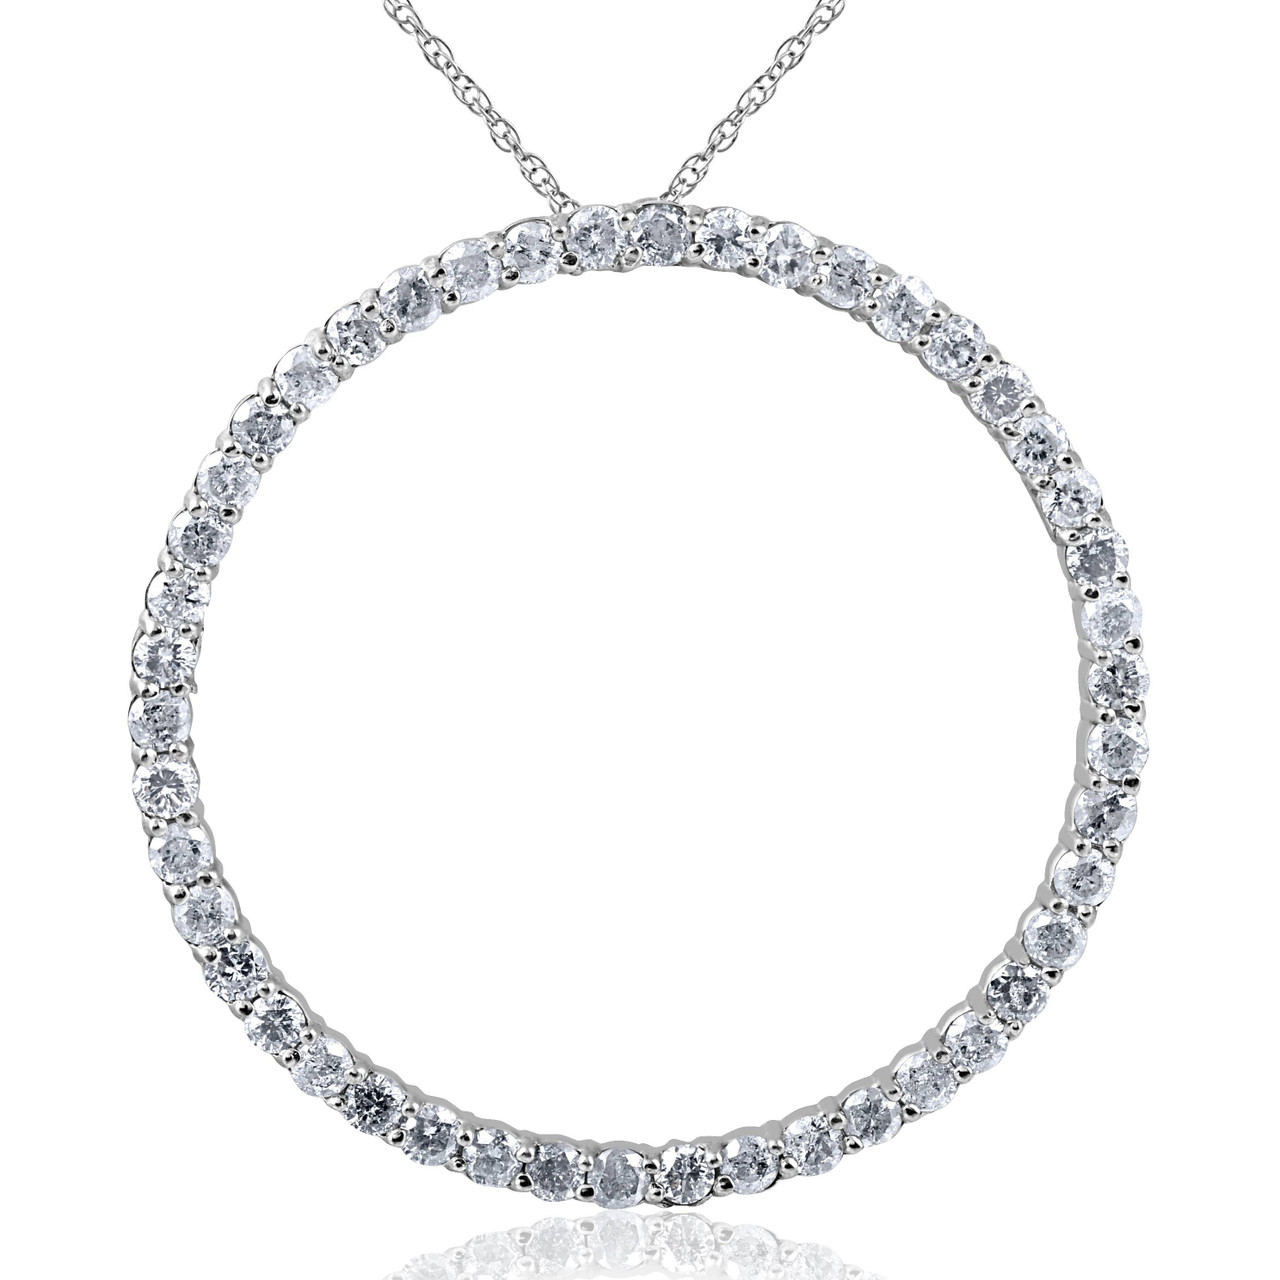 10K white gold and 20 points diamonds necklace - 18